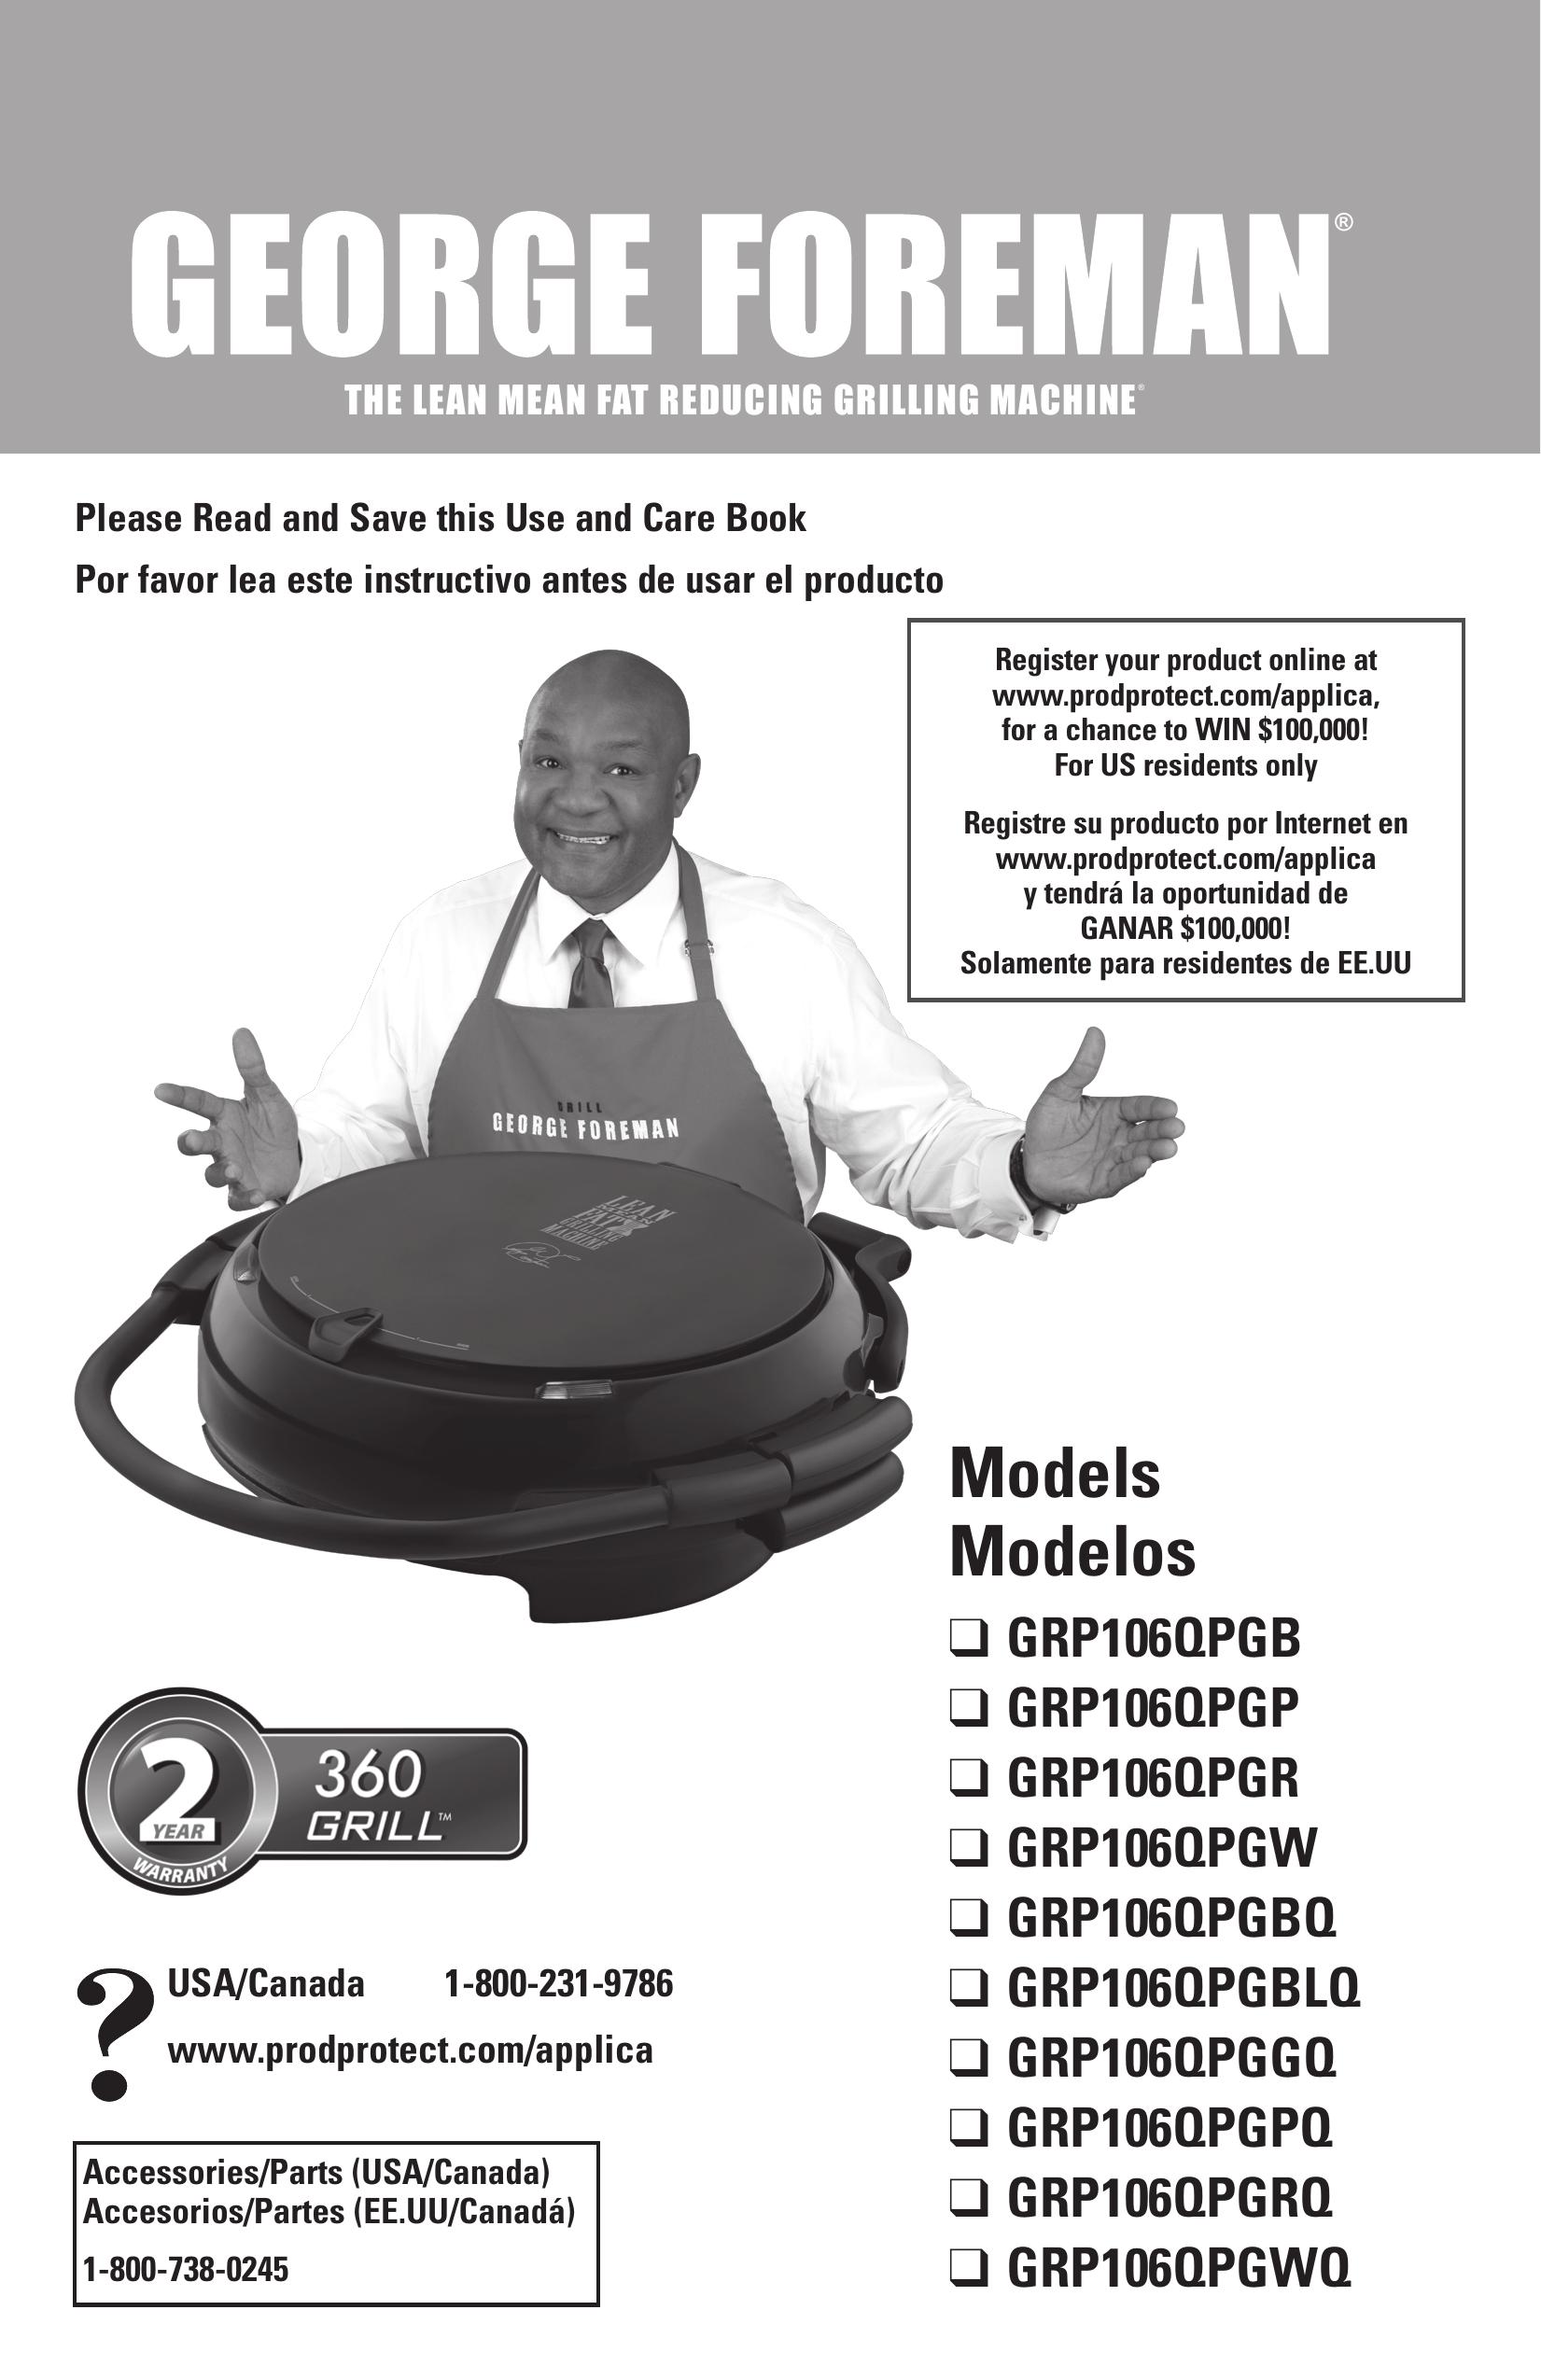 George Foreman GRP106QPGW Electric Grill User Manual